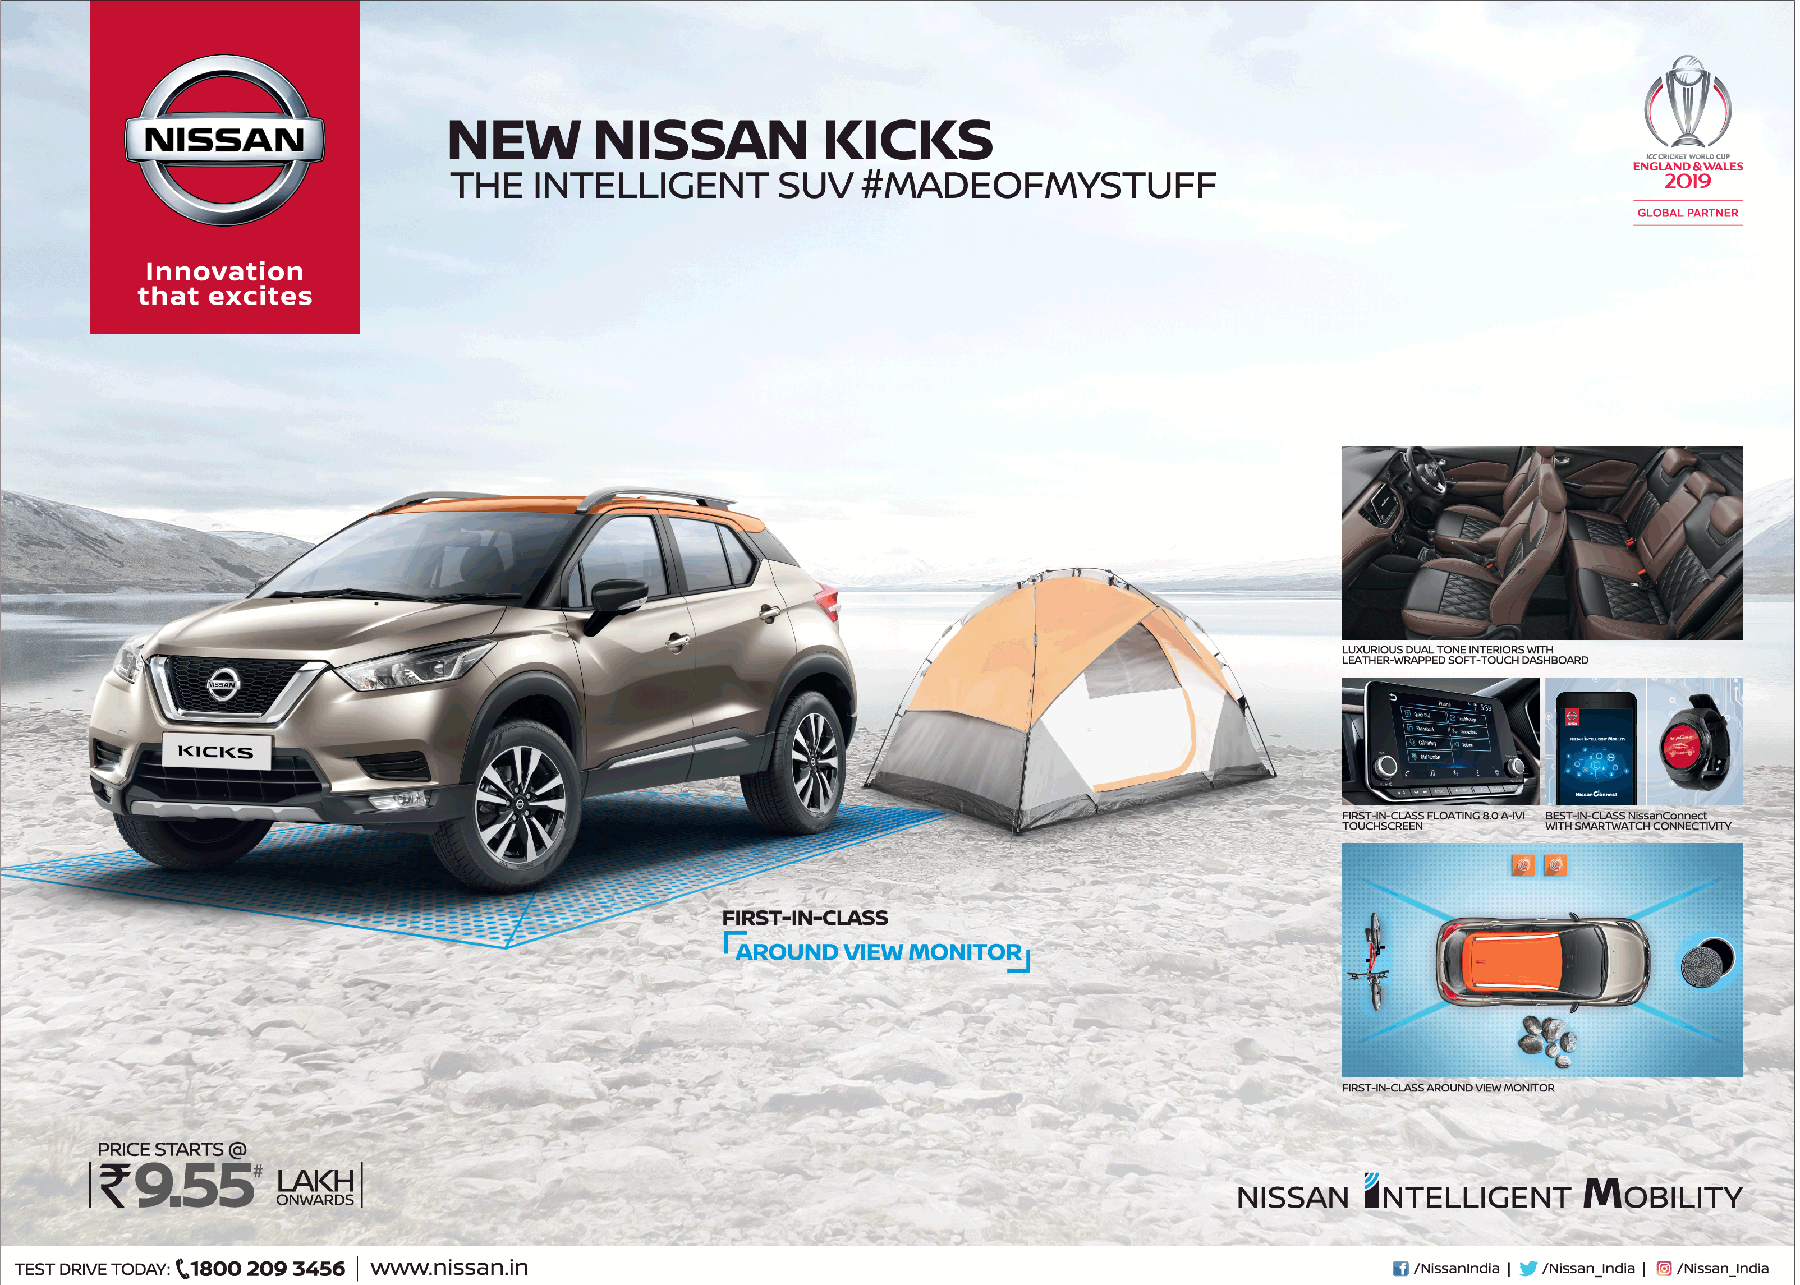 new-nissan-kicks-price-starts-from-rs-9.55-lakh-ad-delhi-times-27-01-2019.png